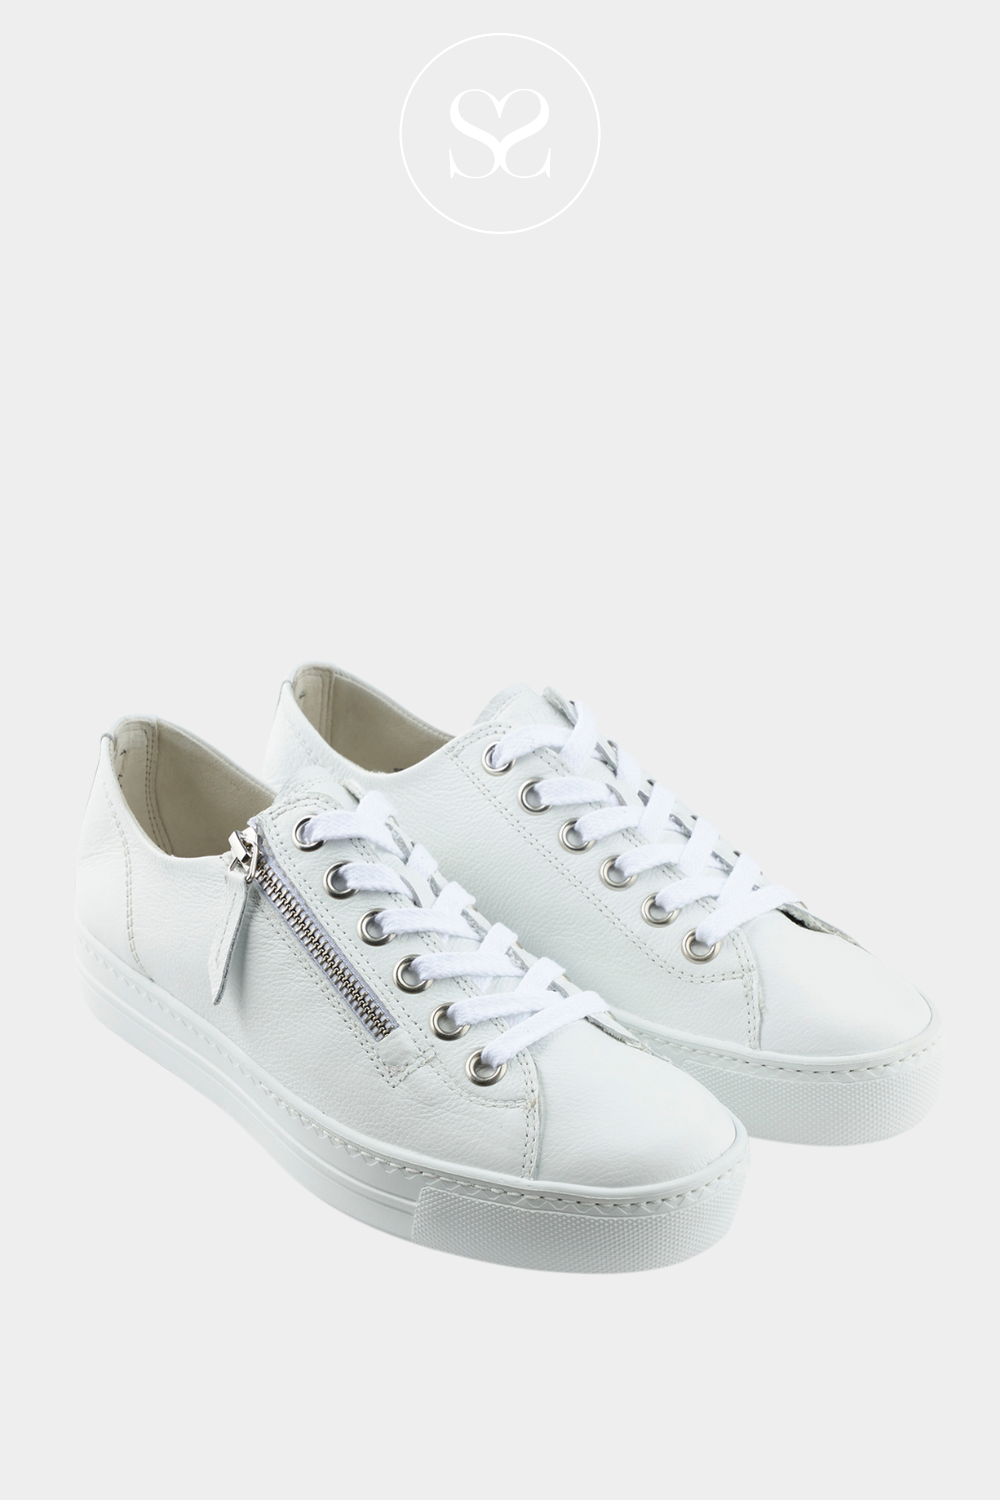 Comfortable white trainers from Paul Green